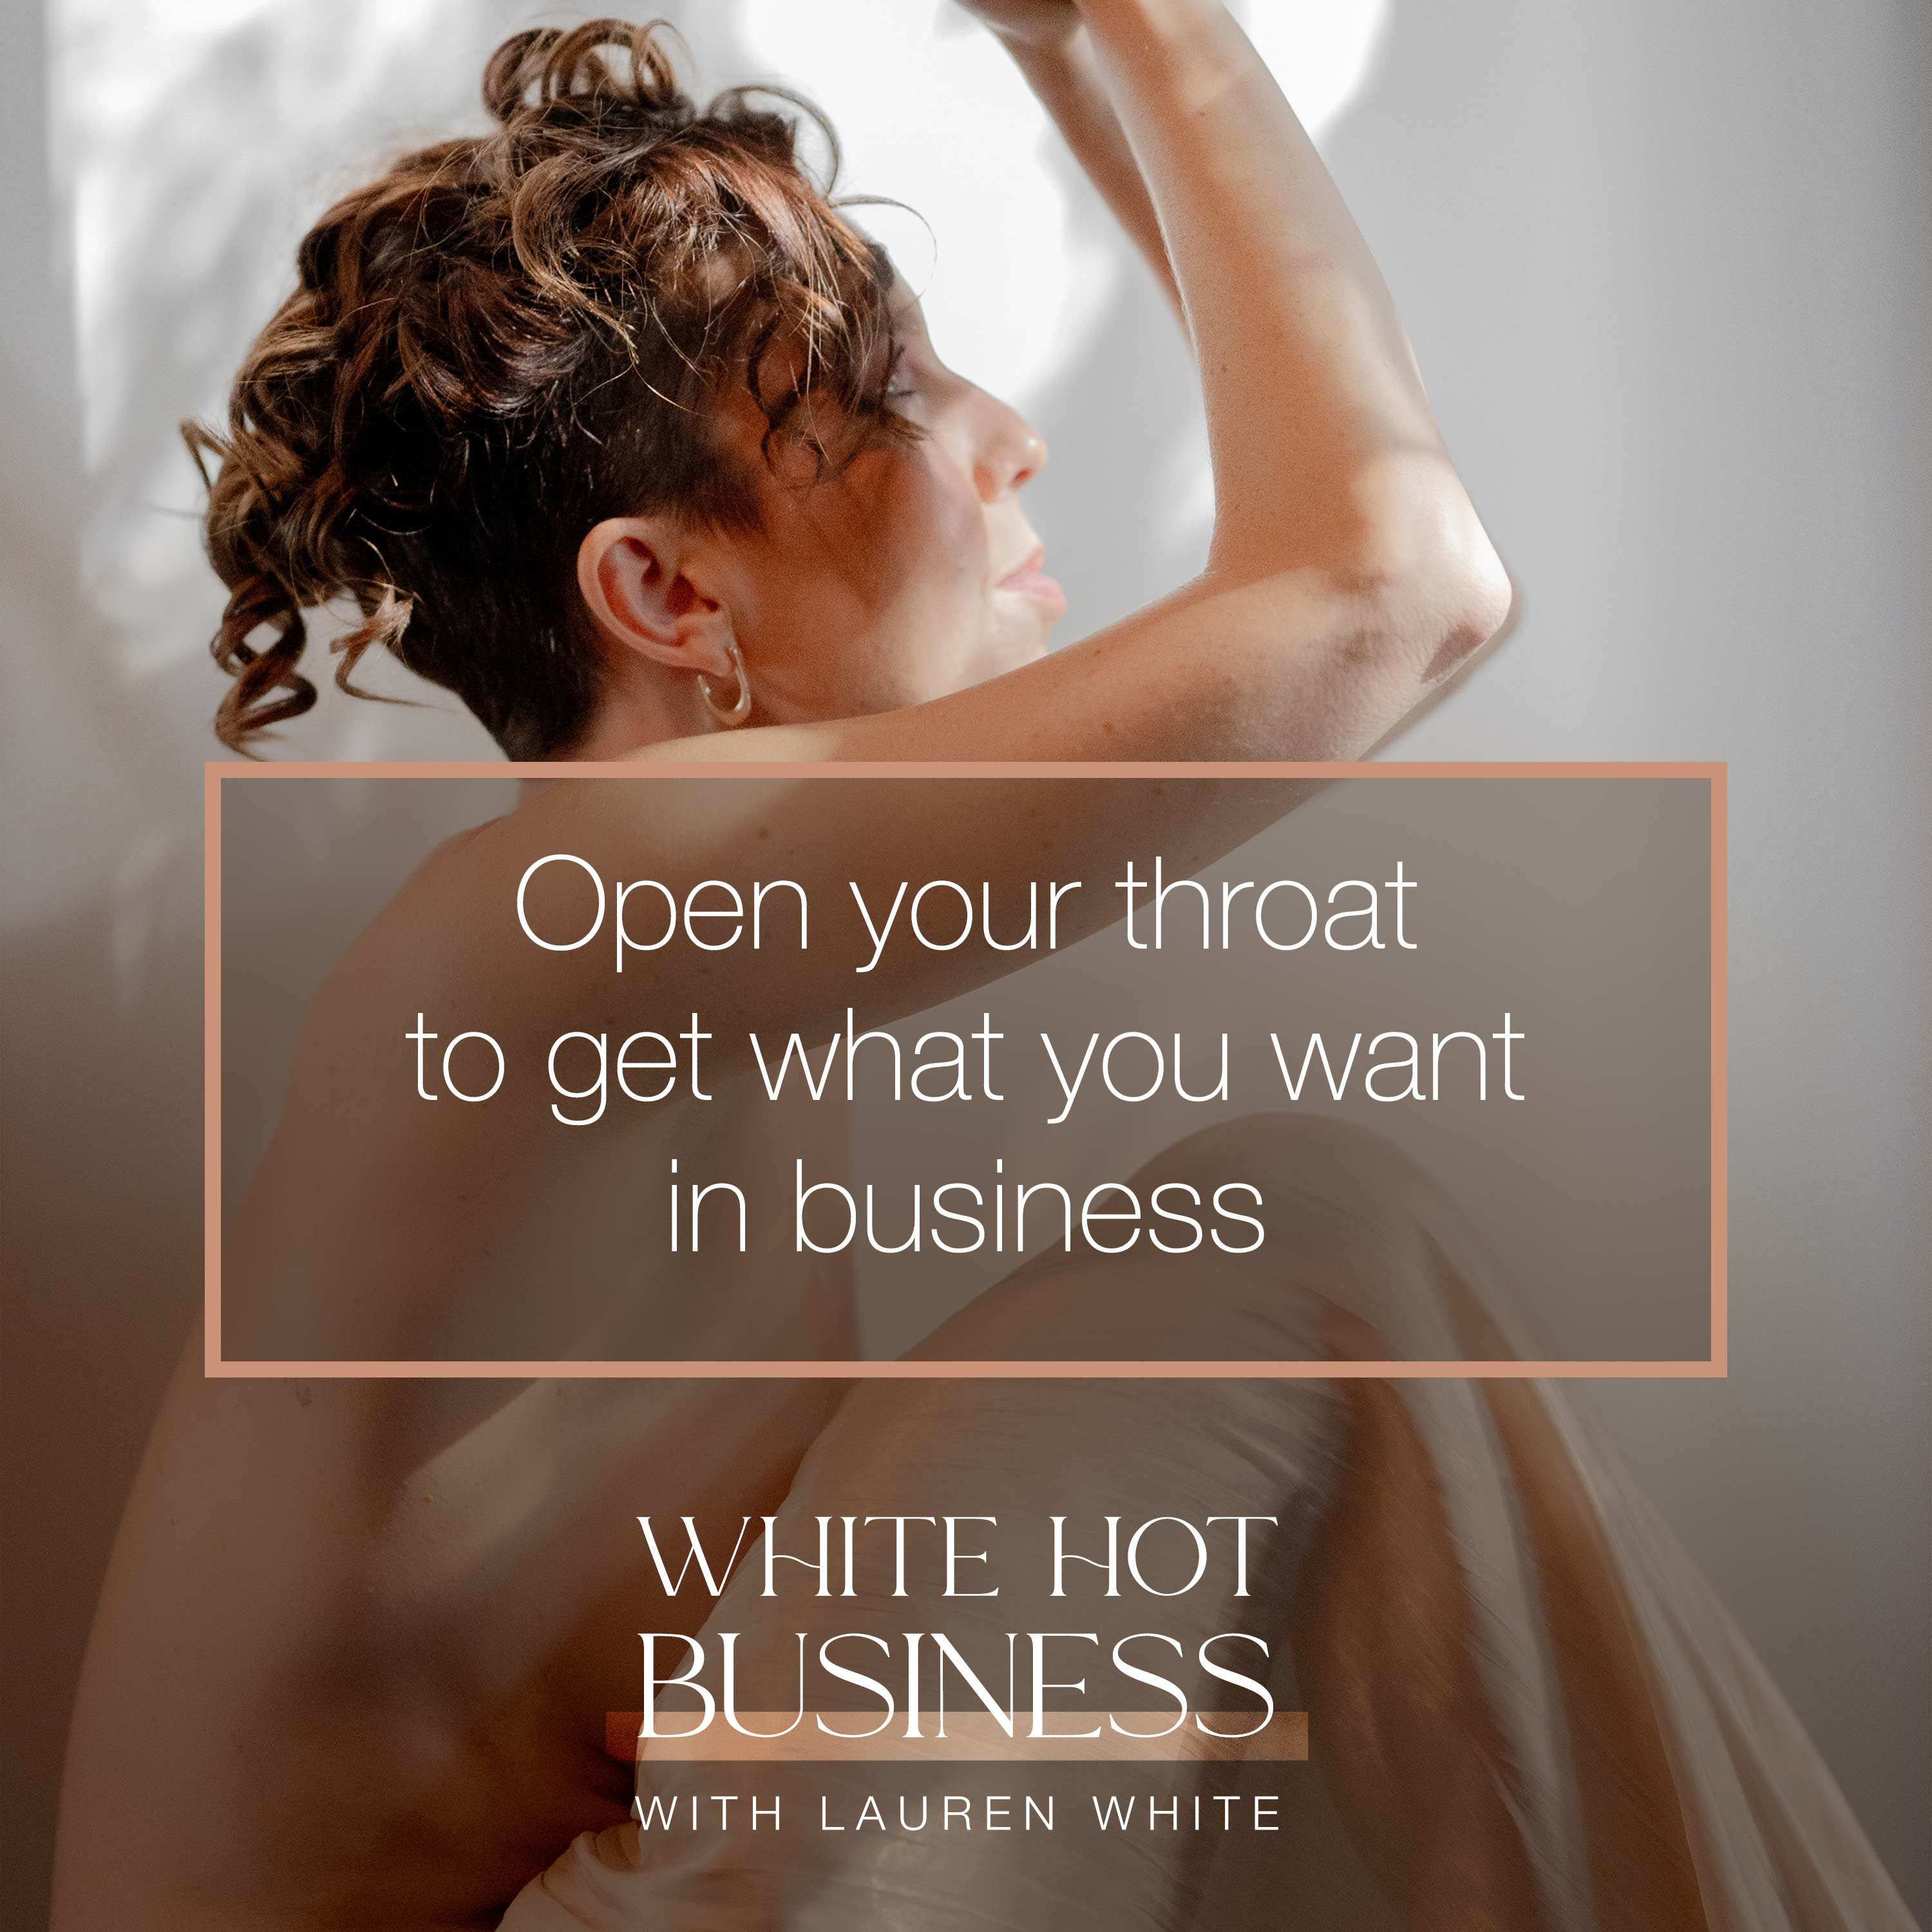 Open your throat to get what you want in business